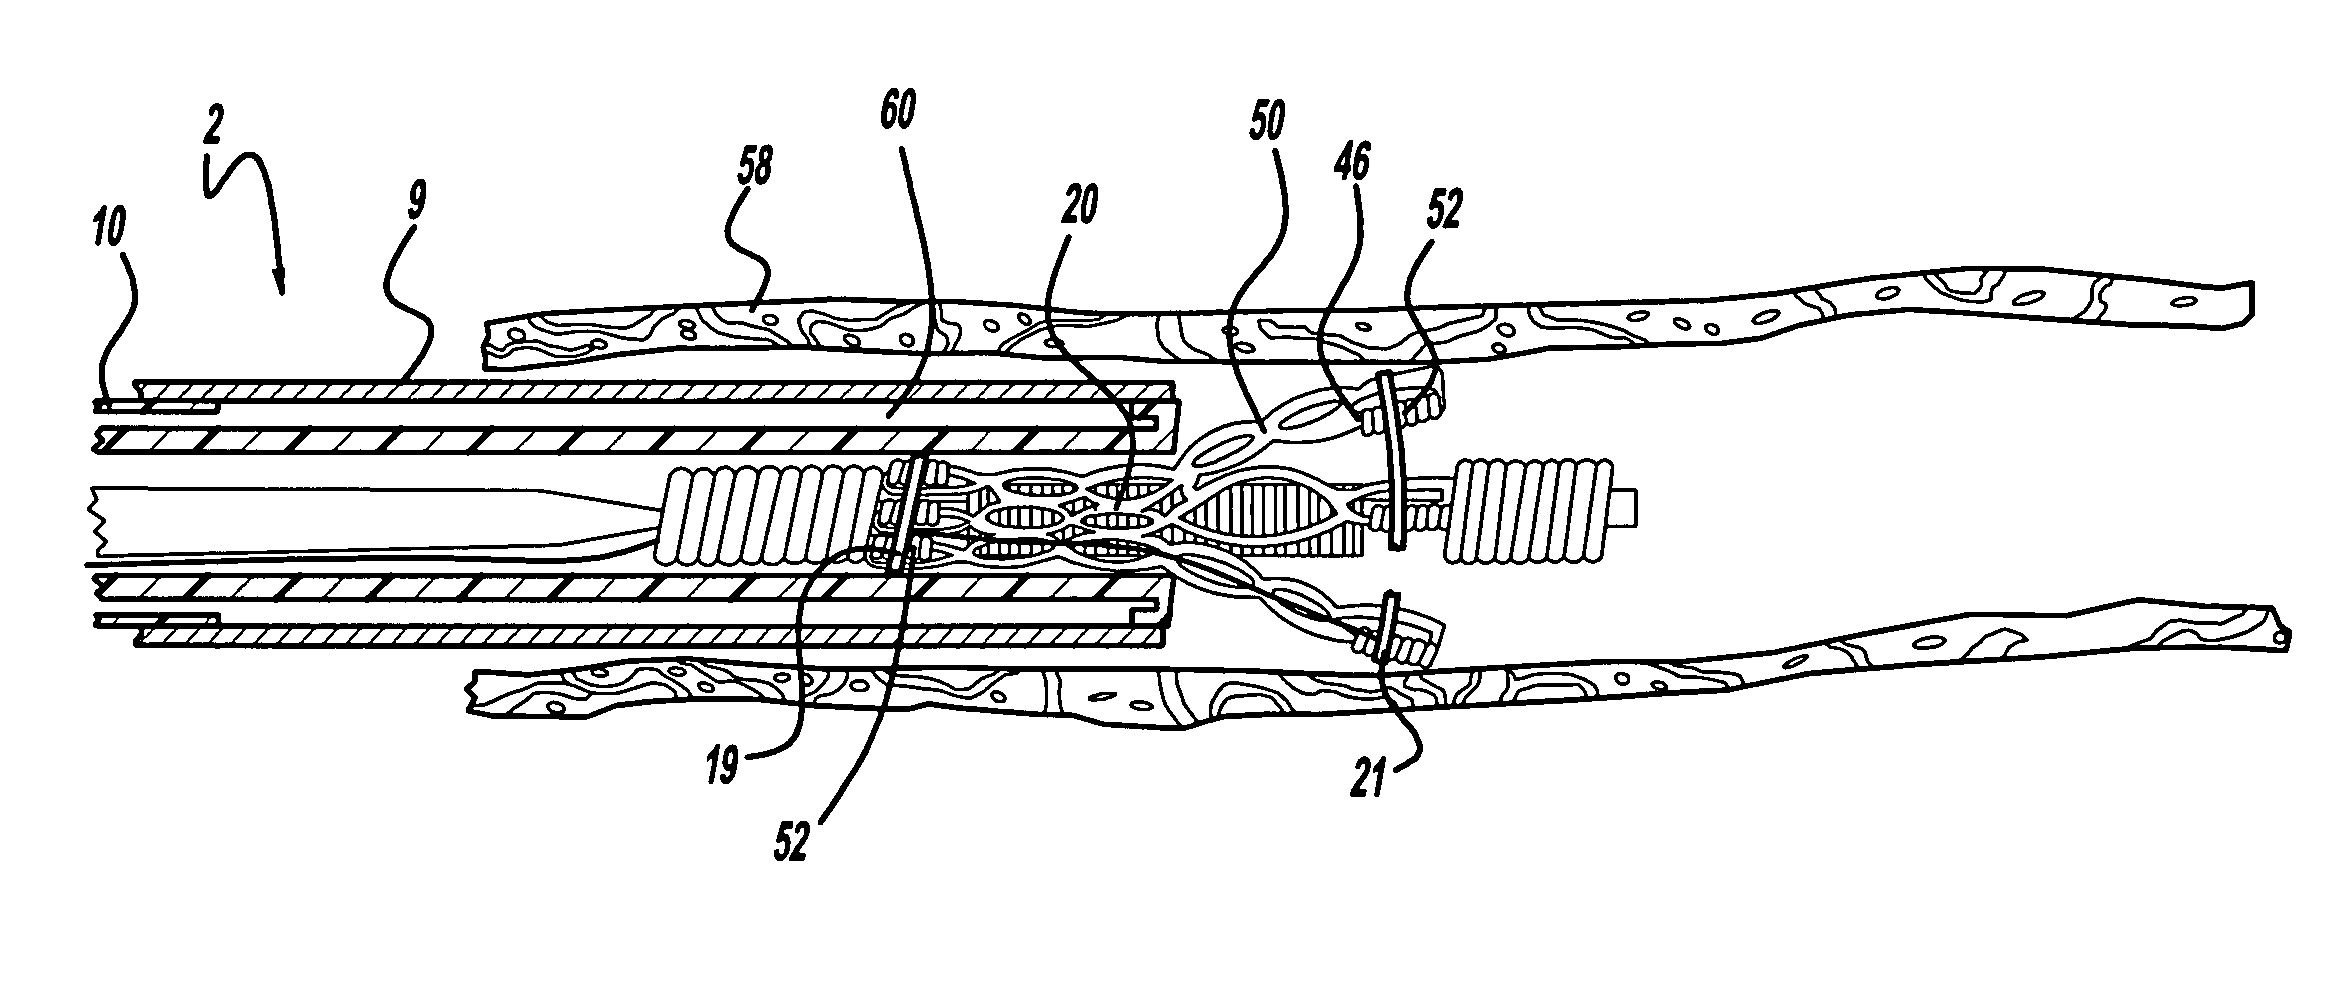 Self-expanding stent and stent delivery system for treatment of vascular disease